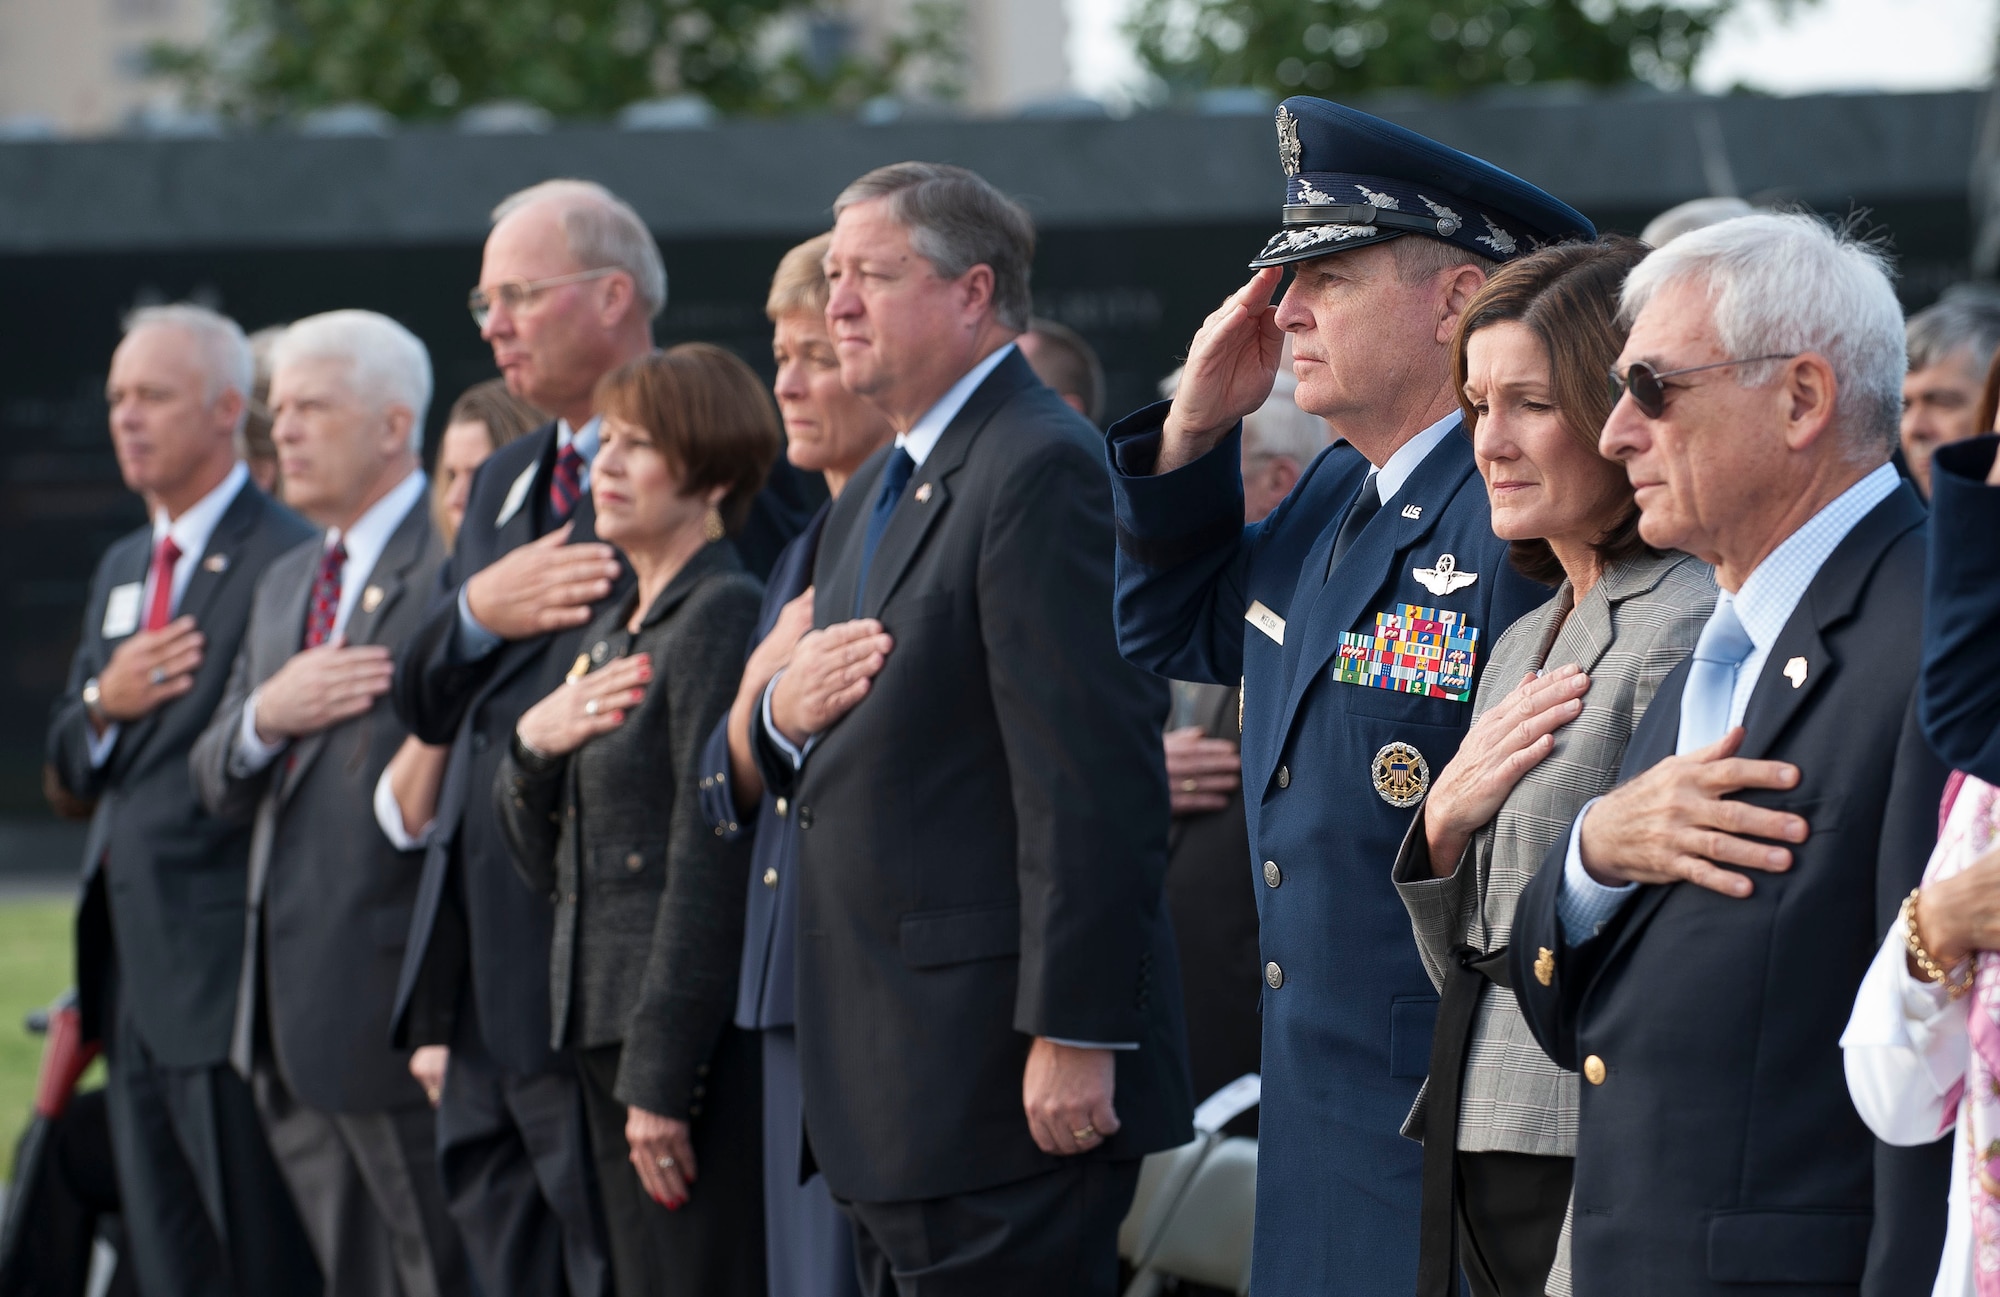 Air Force senior leaders and members of the Air Force Association gathered at the Air Force Memorial in Arlington, Va., Sept. 16, 2012, for the Air Force Association's annual wreath laying ceremony commemorating AFA members who died in the last year. On hand to lay the wreath were: Secretary of the Air Force Michael Donley, Air Force Chief of Staff Gen. Mark A. Welsh III, the Air Force Association's Chairman of the Board S.Sanford Schlitt and the Senior Enlisted Leader to the Chief, National Guard Bureau Chief Master Sgt.  Denise Jelinski-Hall. (U.S. Air Force photo/Jim Varhegyi)